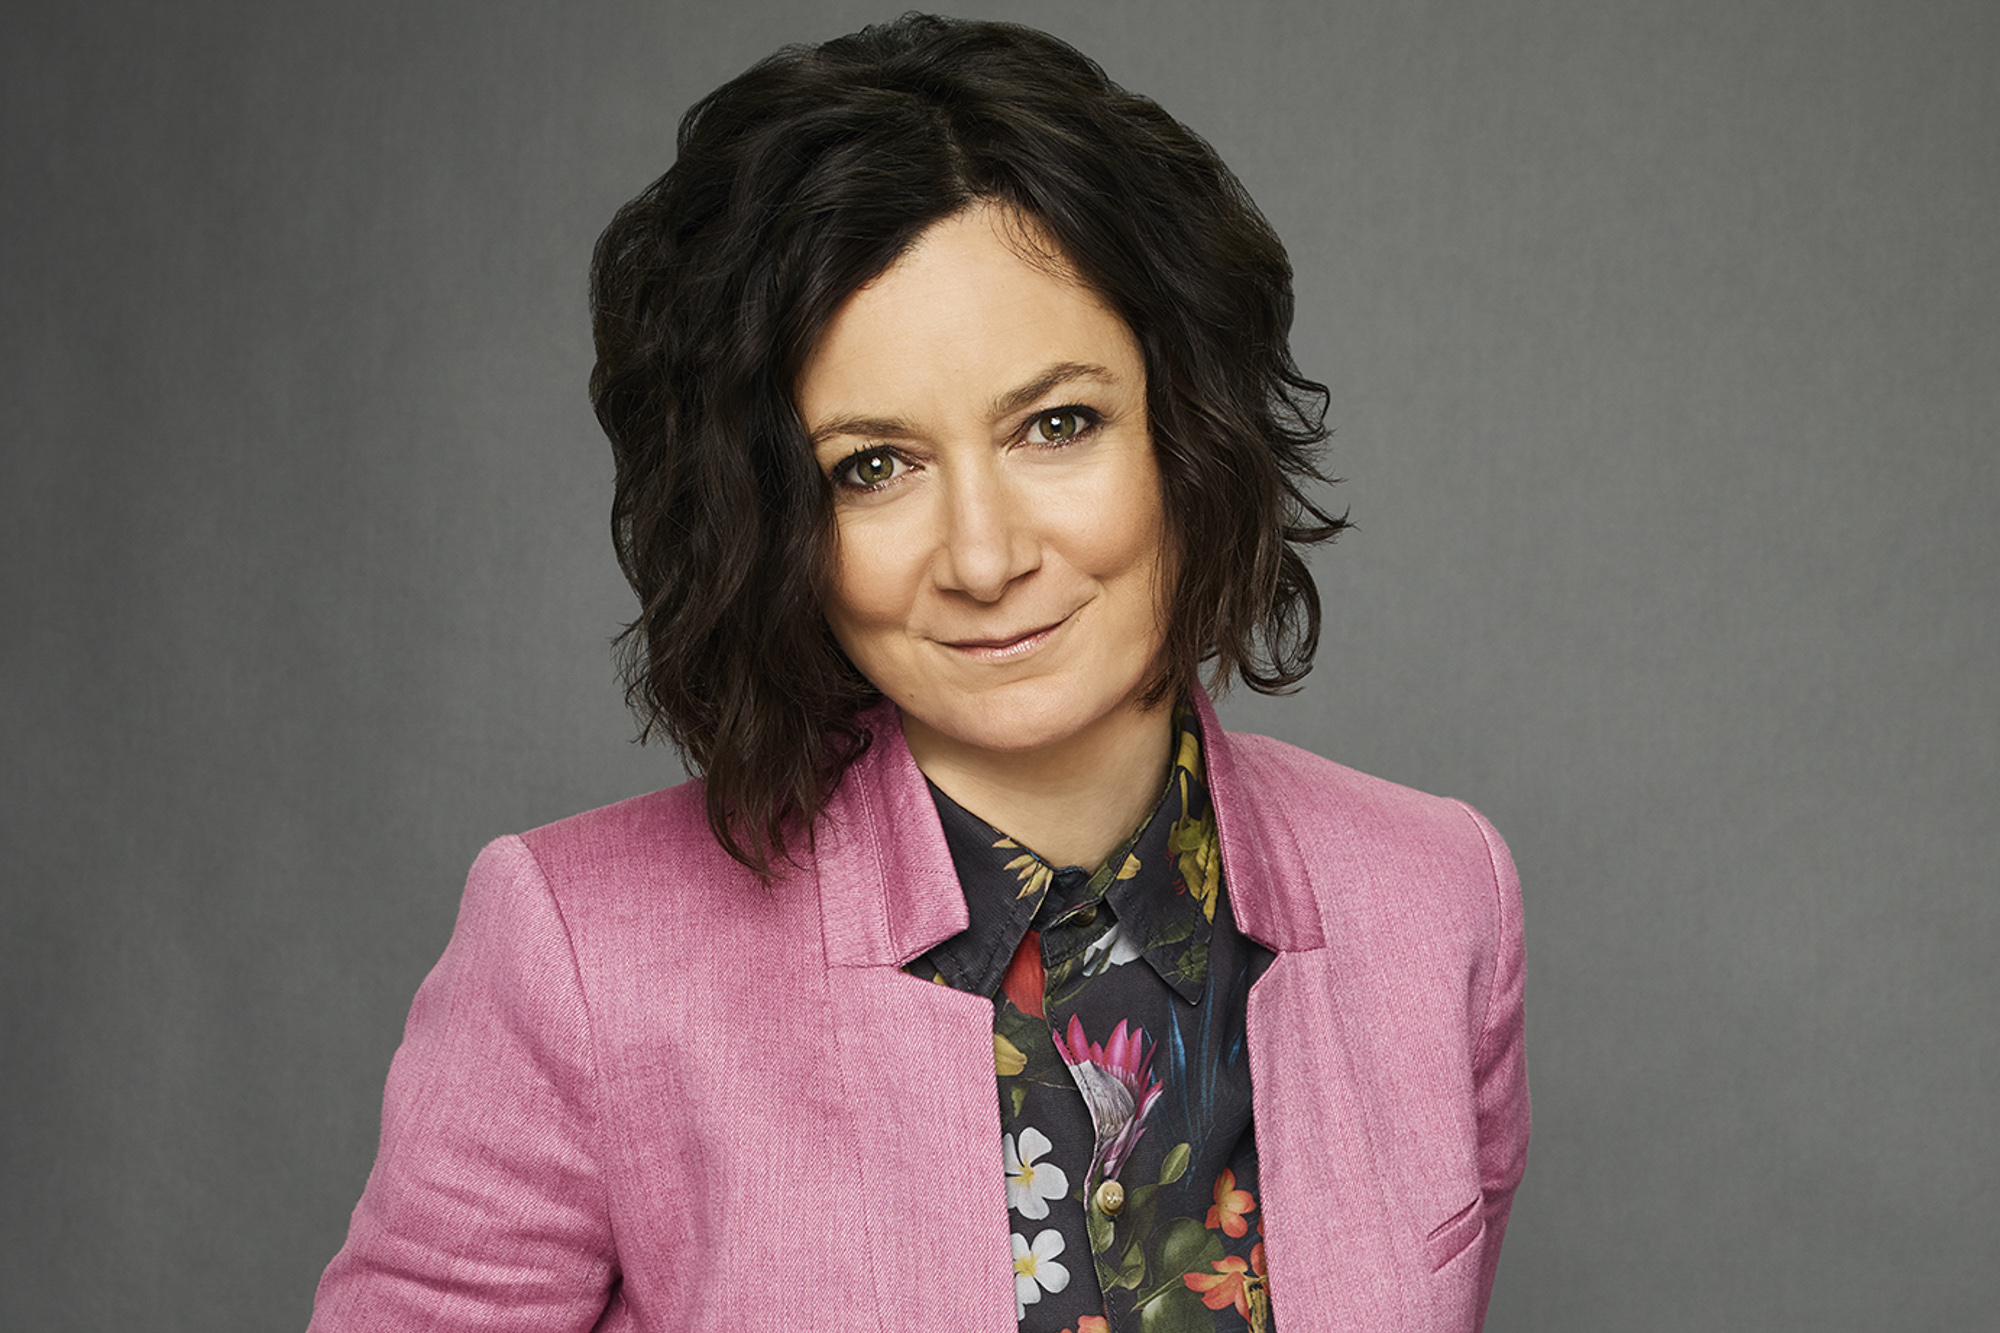 She wasn't always Darlene! The Conners star Sara Gilbert looks back on a lifetime of roles